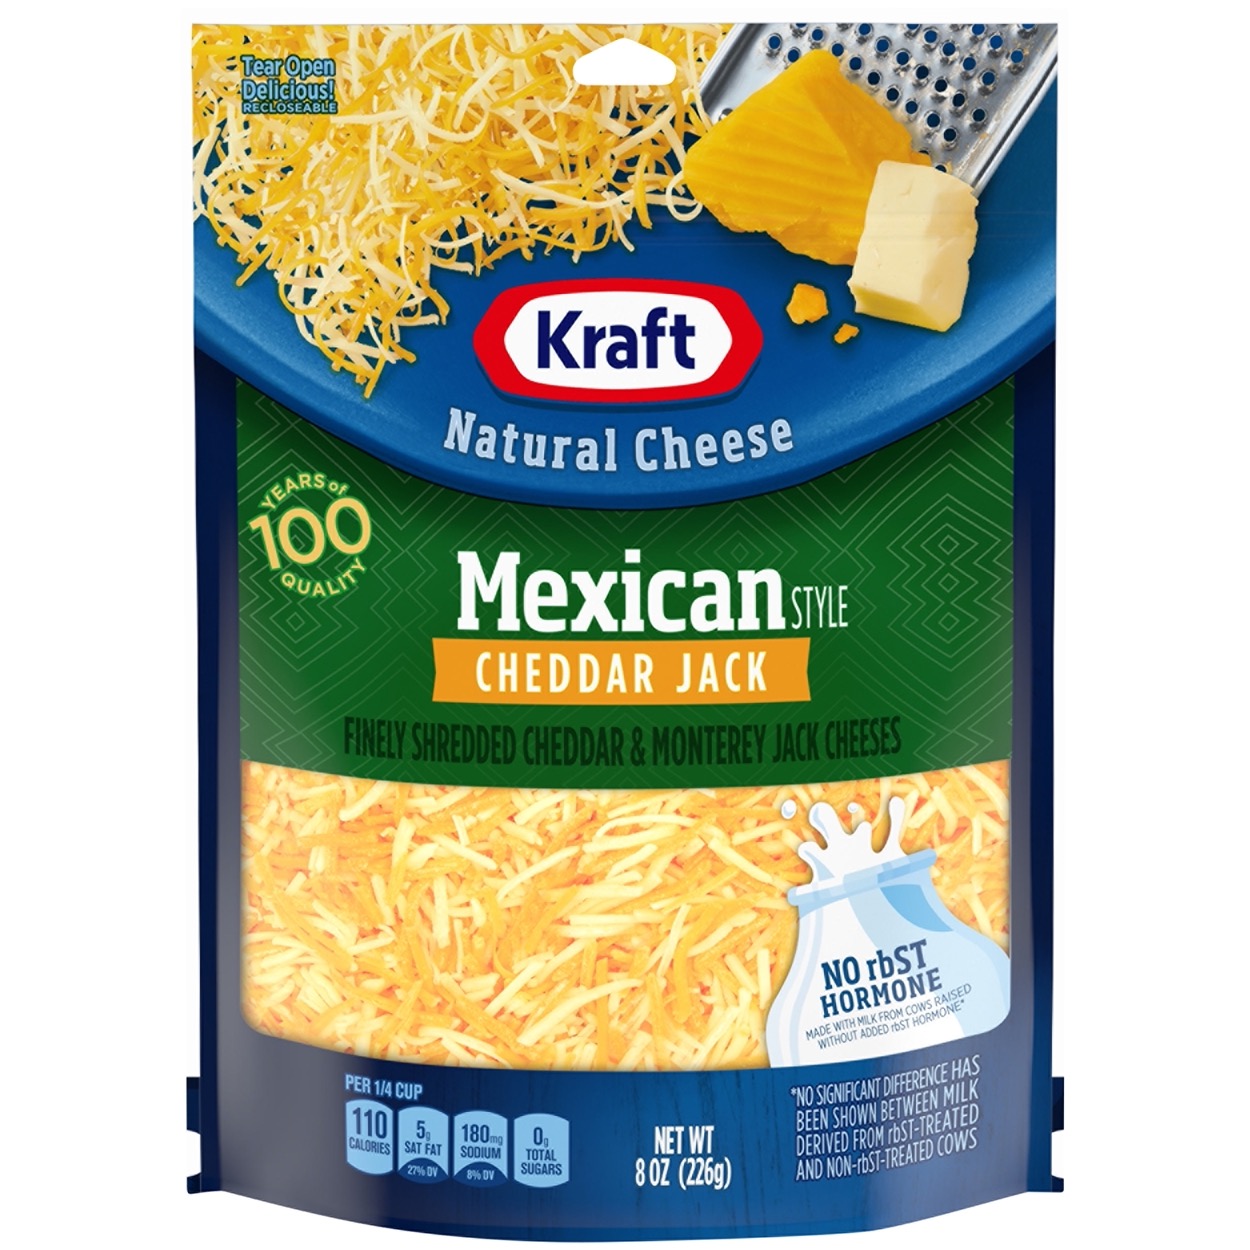 Mexican Style Cheddar Jack